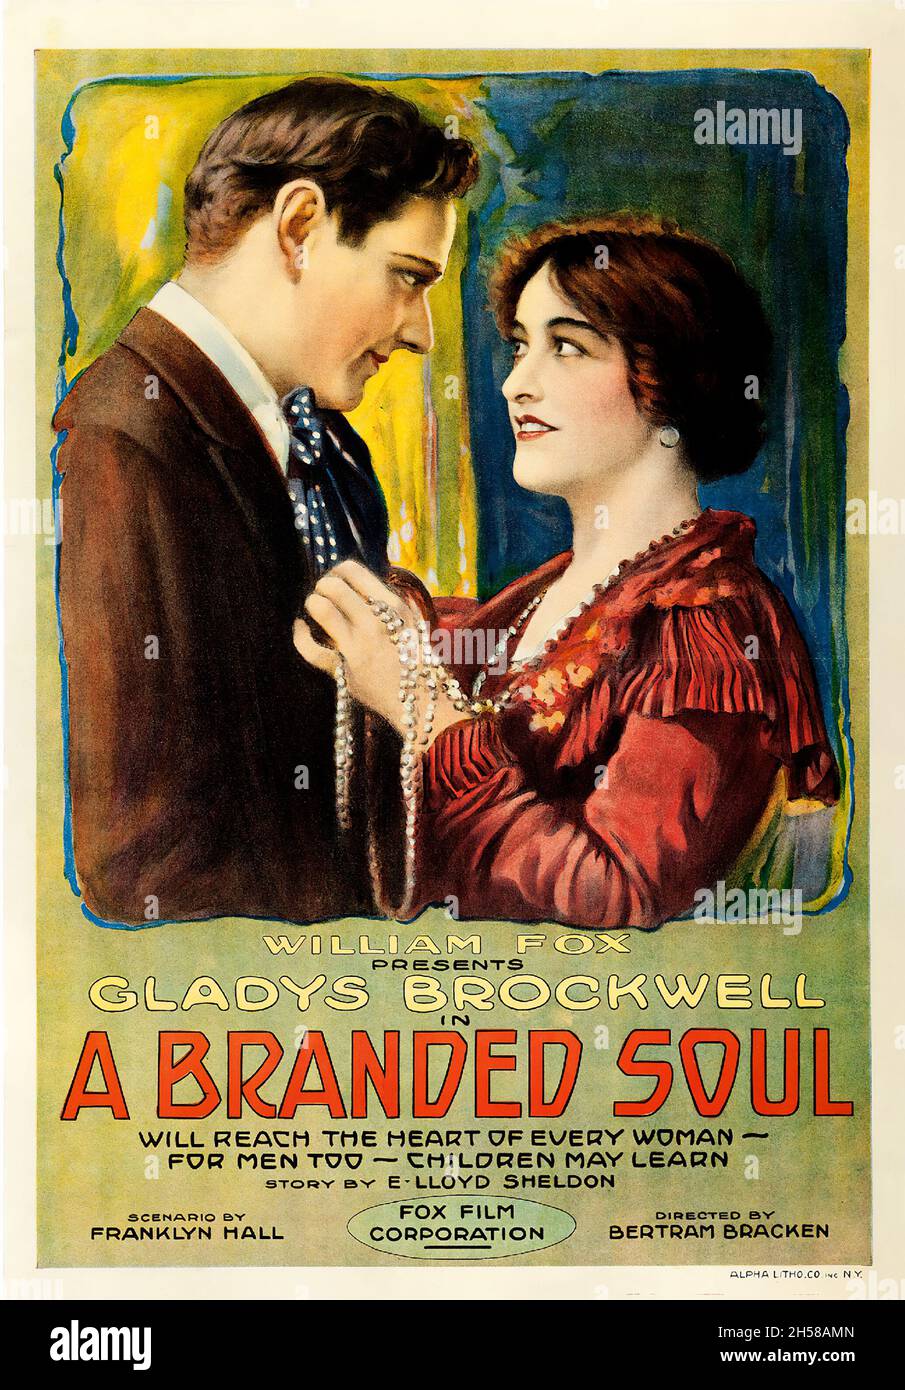 Old and vintage movie / film poster  for the American drama film A Branded Soul (1917) feat. Gladys Brockwell. (William Fox). Stock Photo